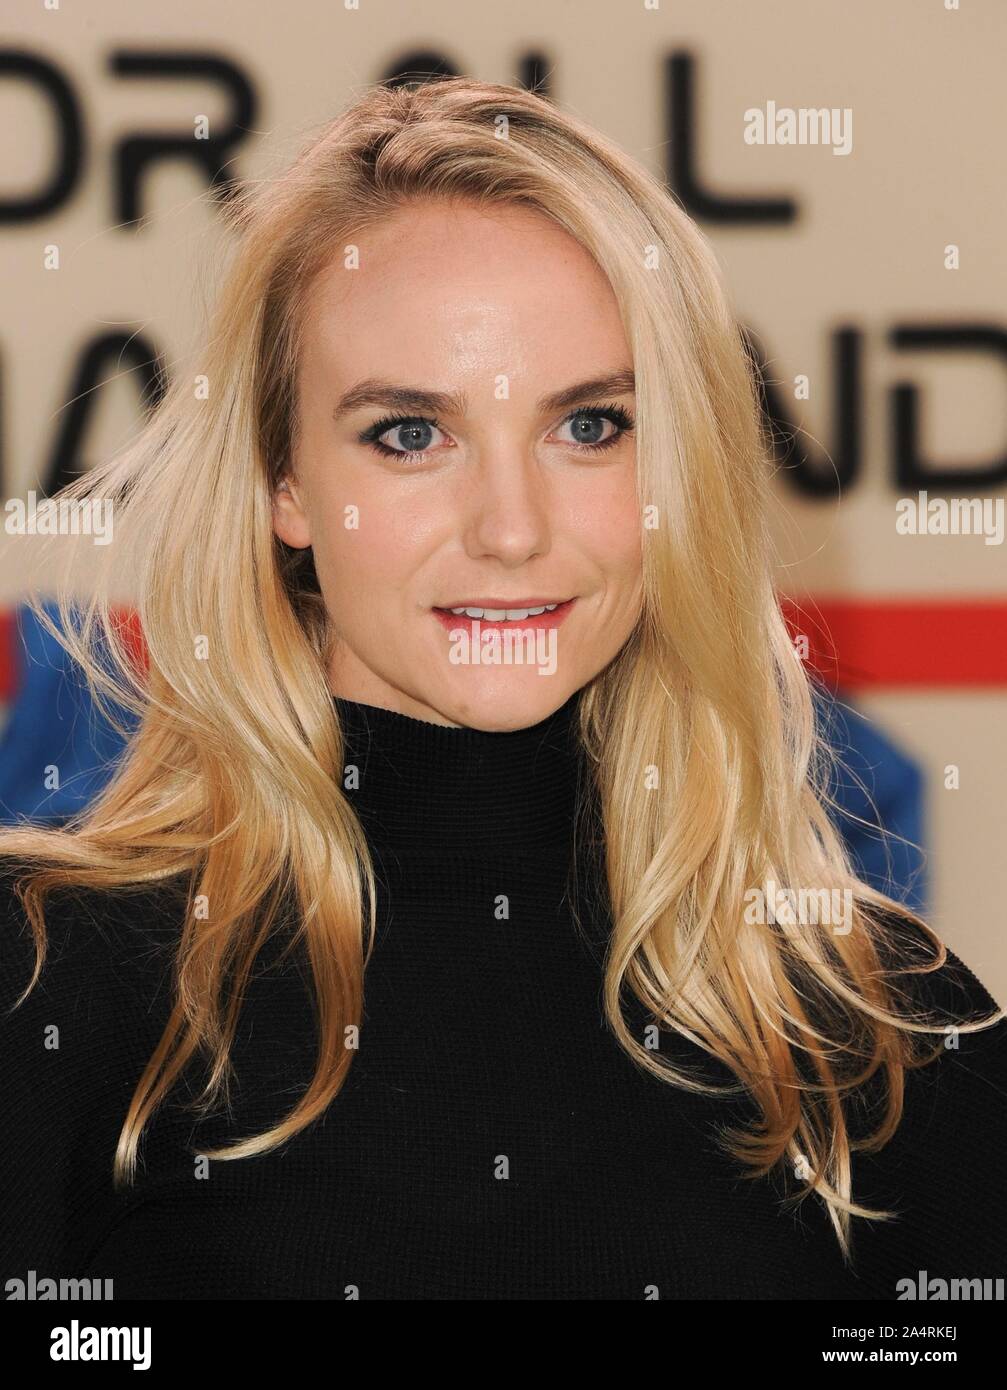 Los Angeles, CA. 15th Oct, 2019. Joanna Vanderham at arrivals for FOR ALL MANKIND Series Premiere on Apple TV , Fox Regency Village Theater, Los Angeles, CA October 15, 2019. Credit: Elizabeth Goodenough/Everett Collection/Alamy Live News Stock Photo